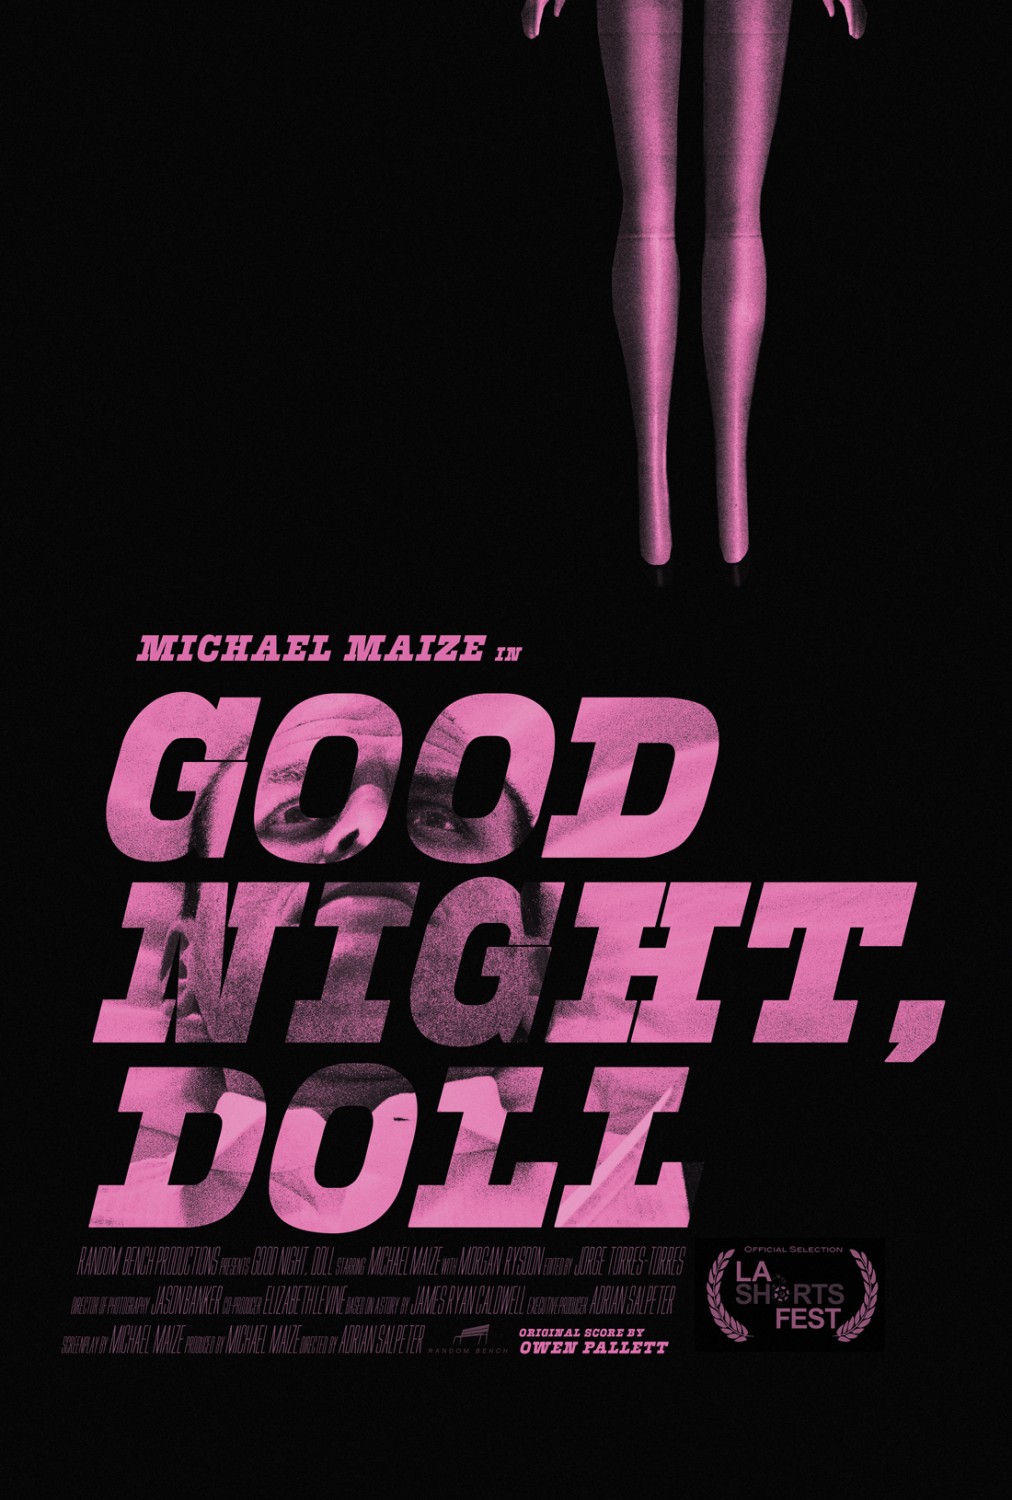 Extra Large Movie Poster Image for Good Night, Doll